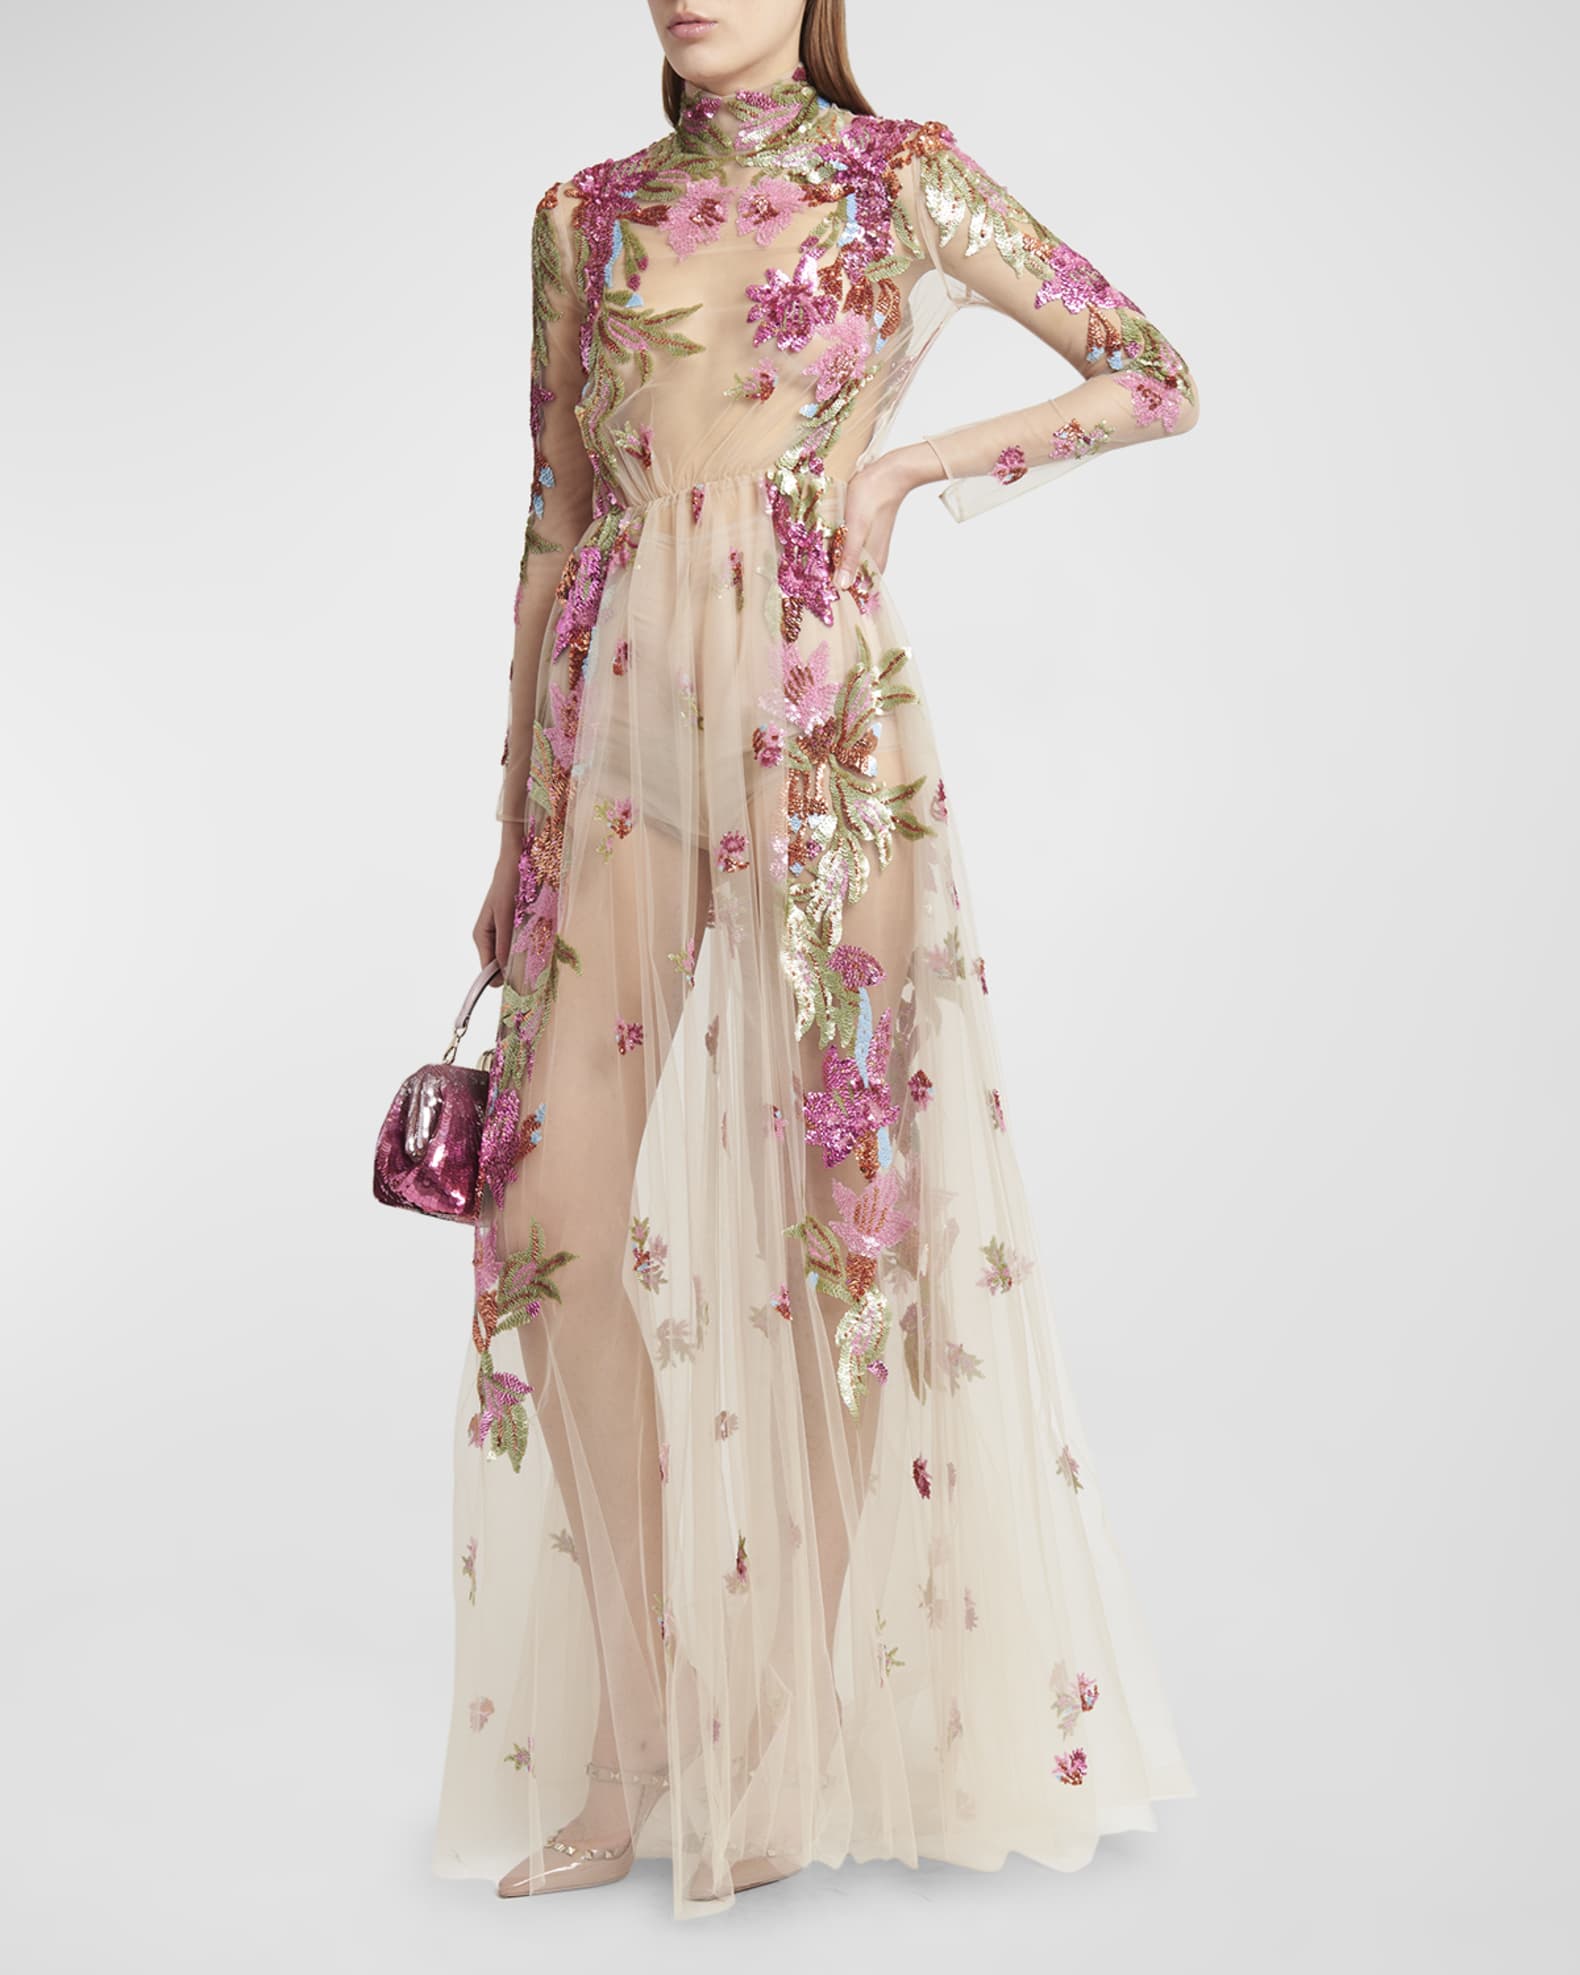 Valentino Garavani Embroidered Tulle Illusion Gown with Floral